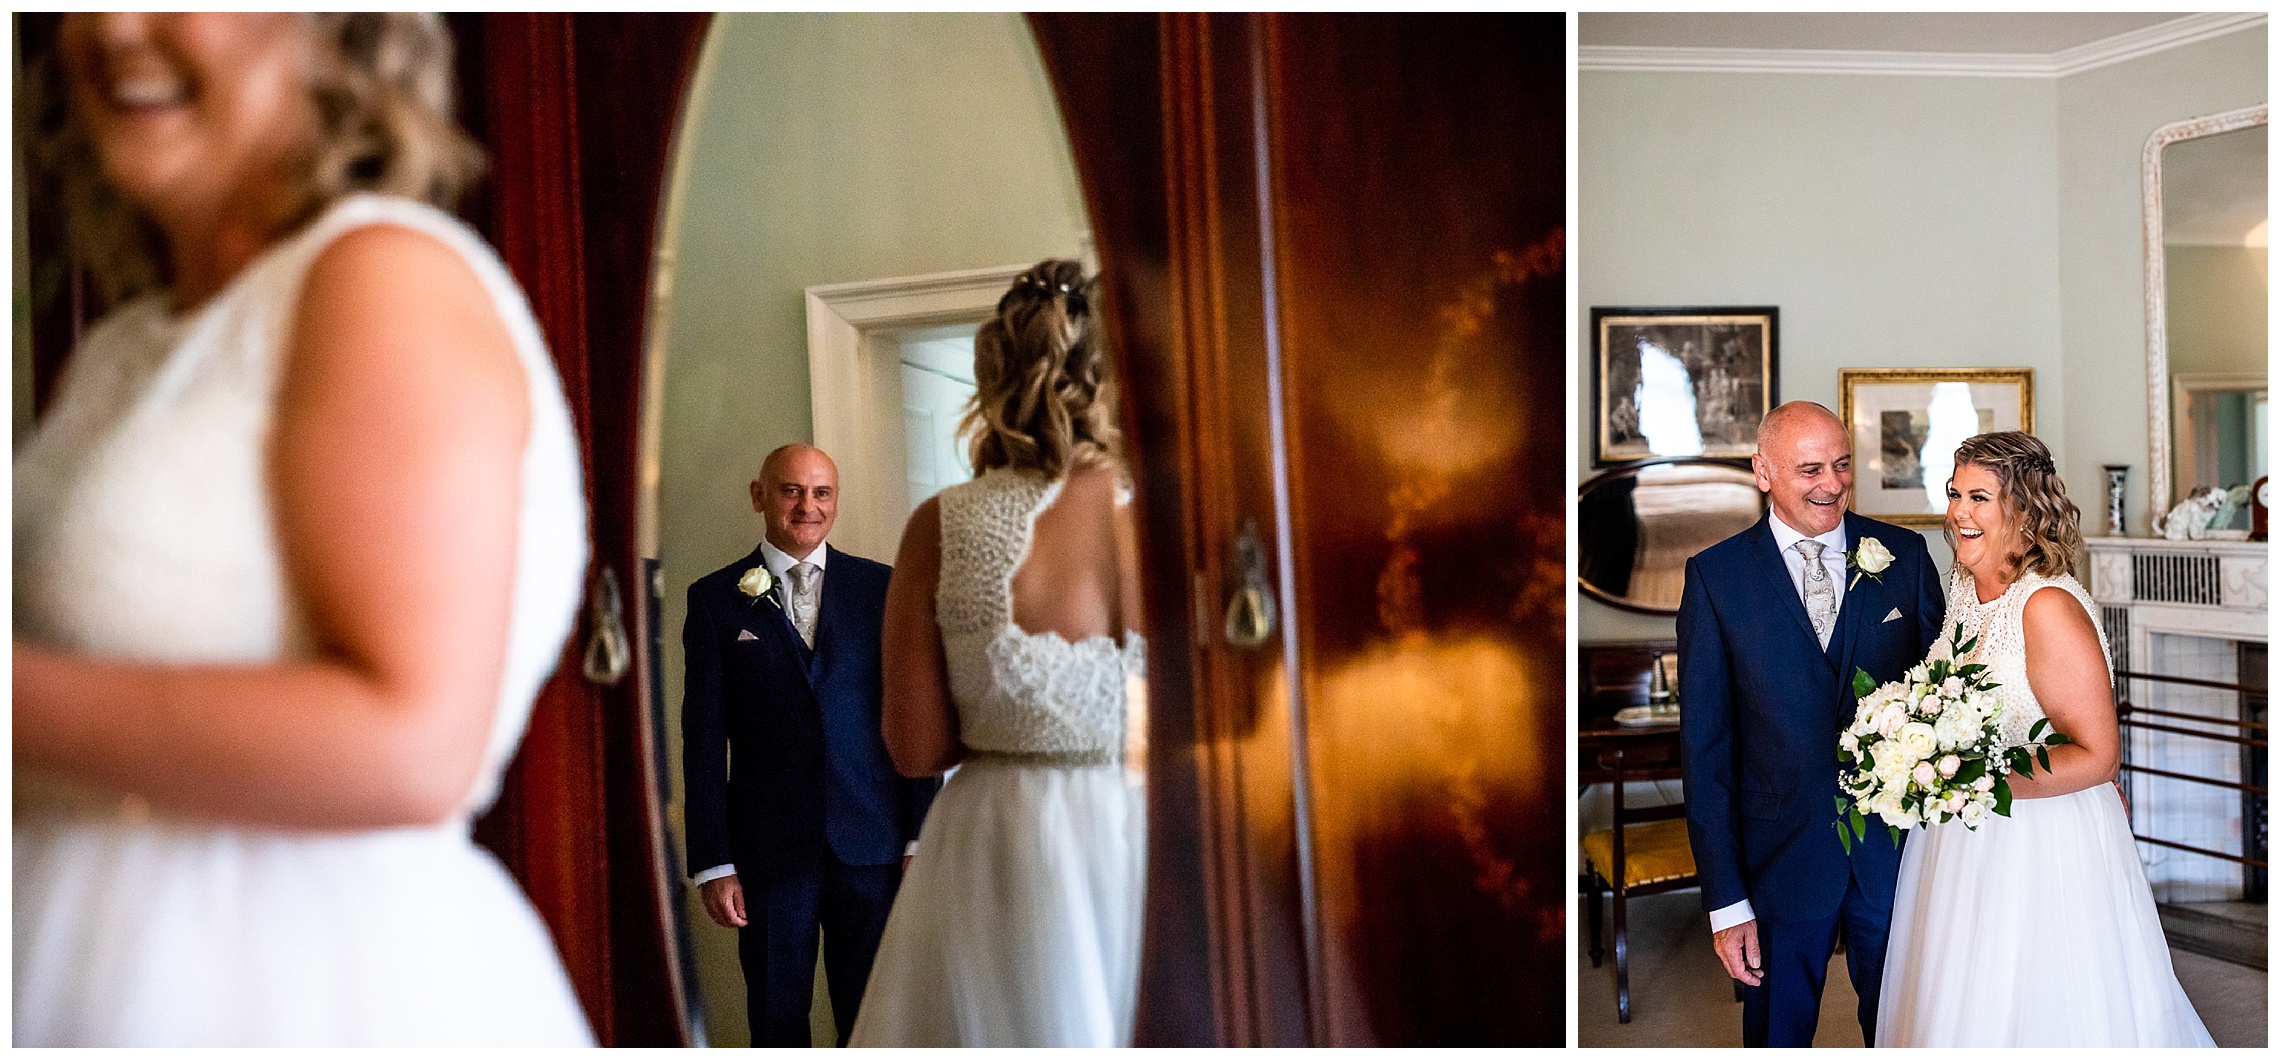 father of the bride looks proud as he see's his daughter for the first time in her wedding dress